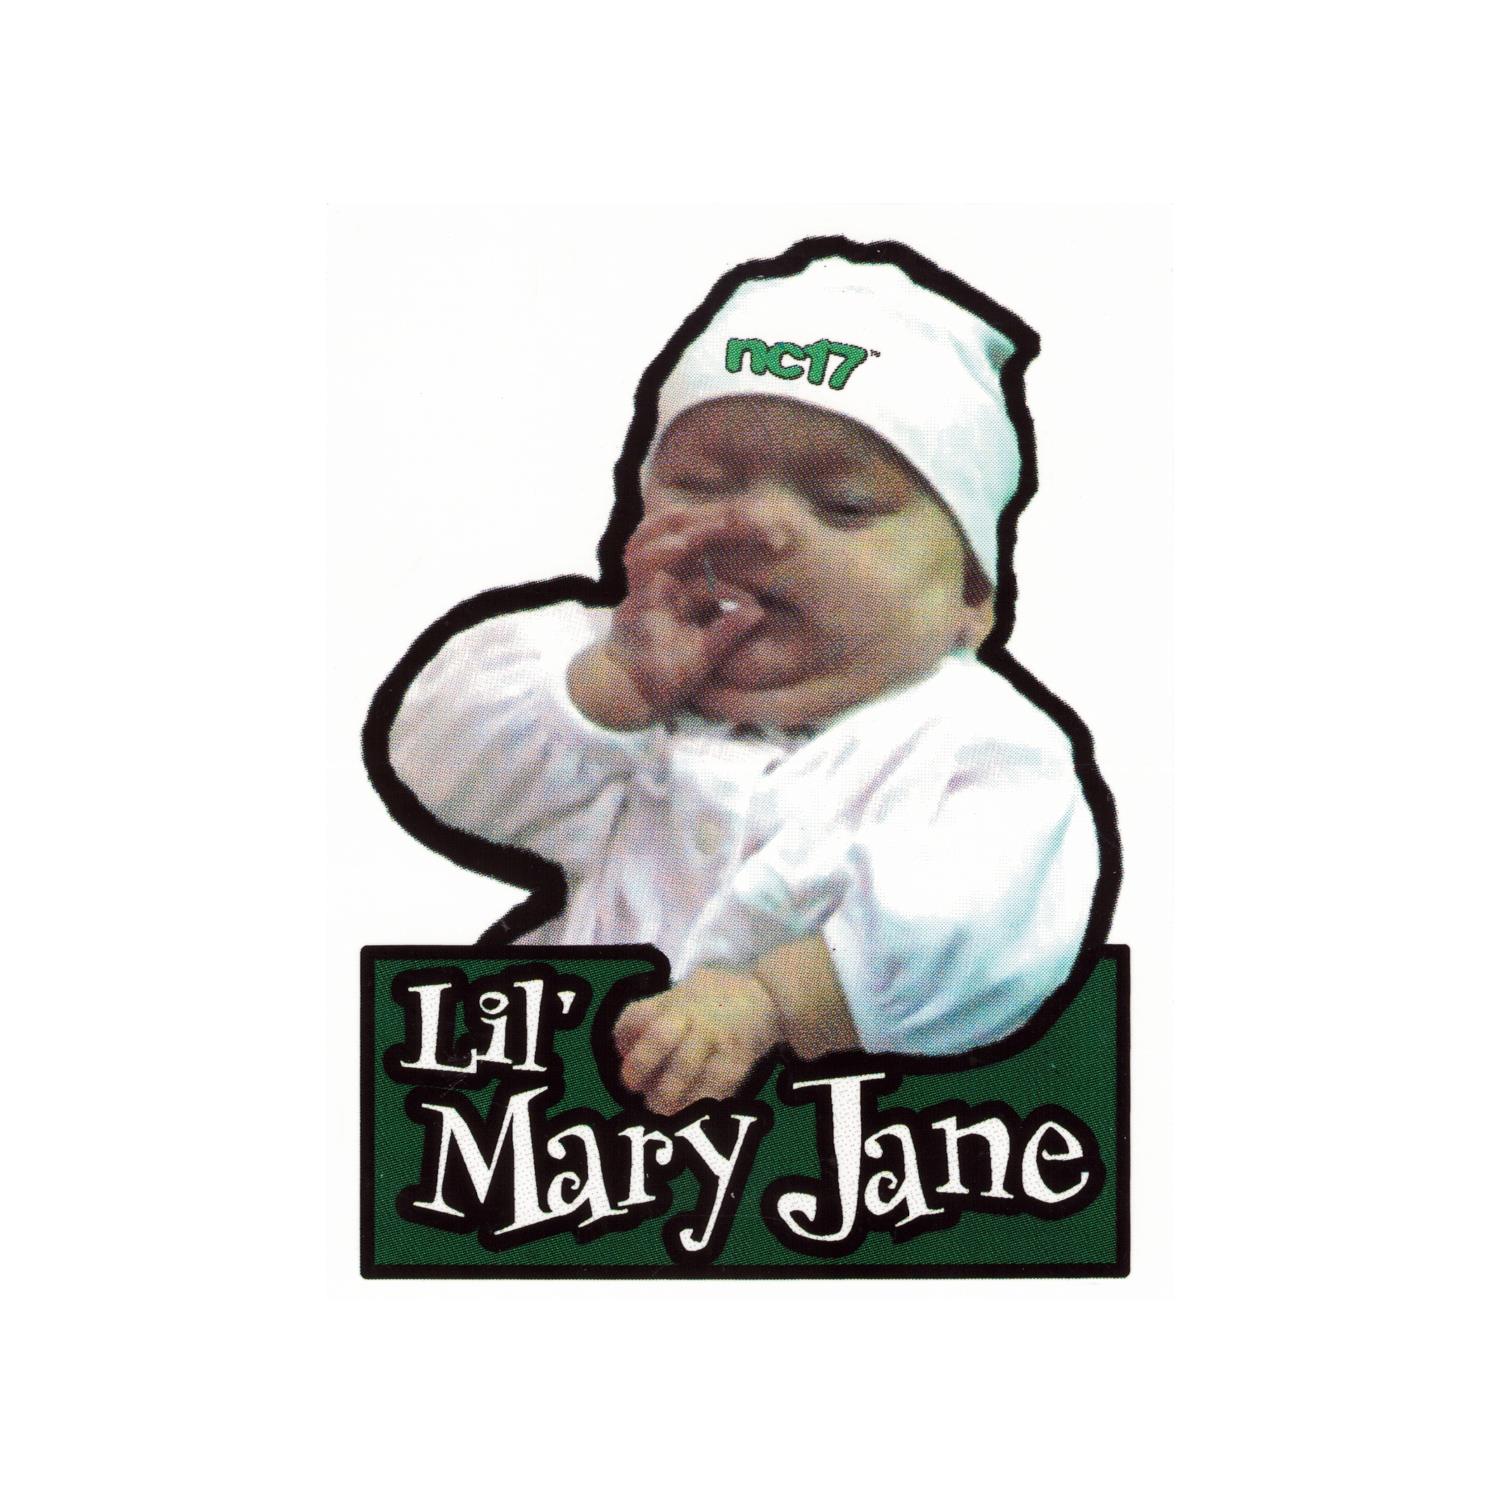 nc17 Baby Lil' Mary Jane